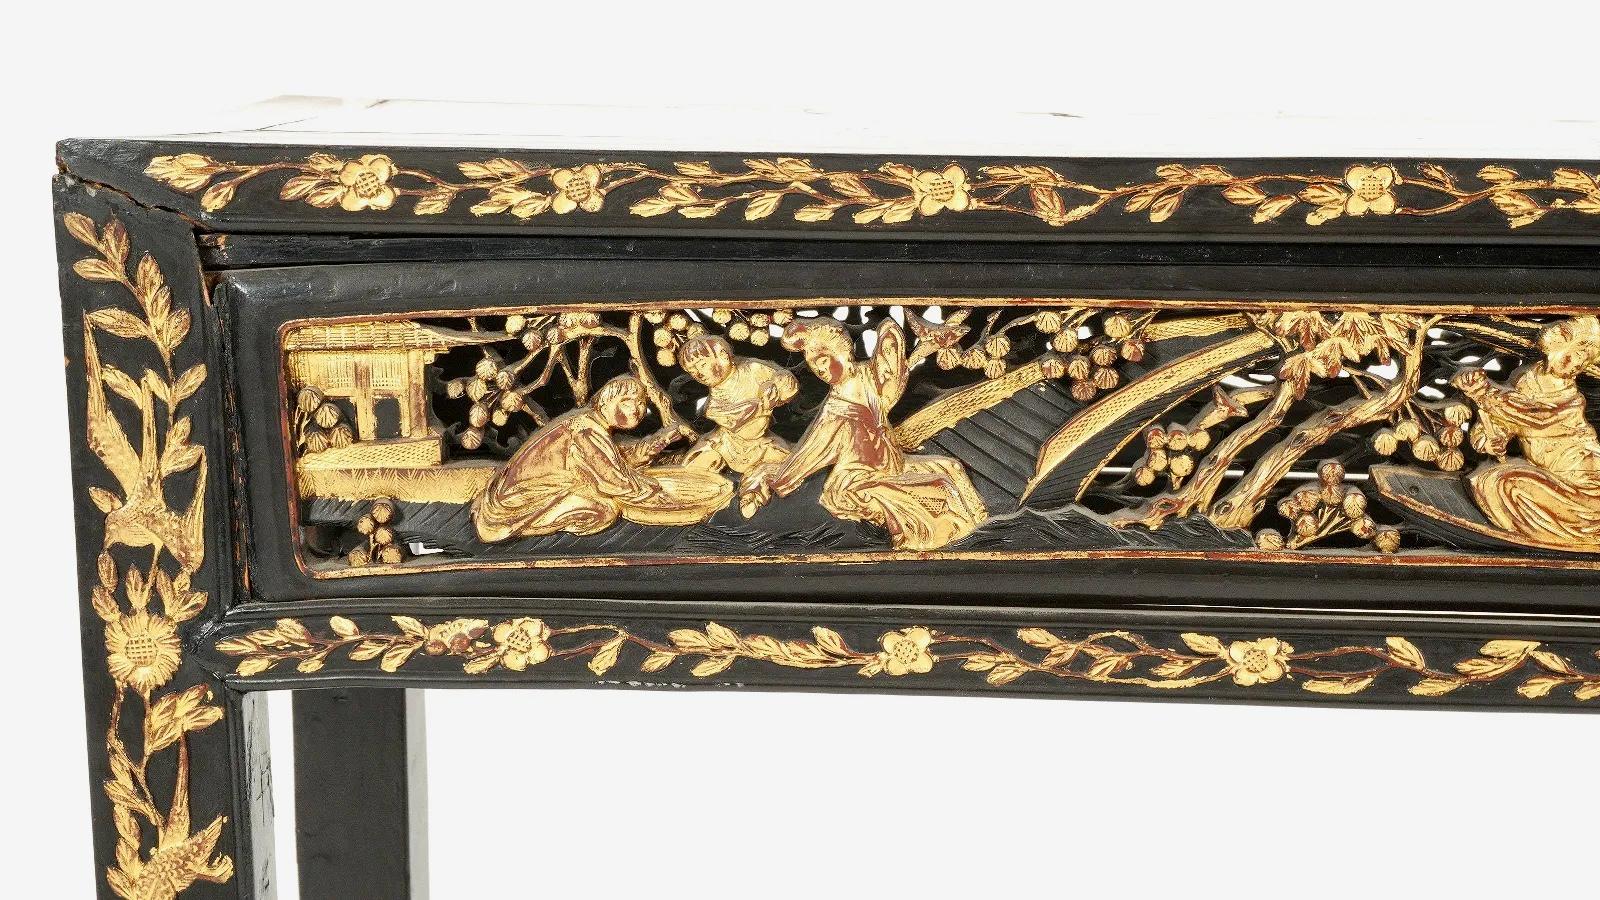 An early 20th century Chinese parcel-gilt altar console table with hand carved décor, This Chinese console table features parcel gilt reticulated skirt panels with figures in landscapes, thin gilded frieze showcasing a delicate scrollwork